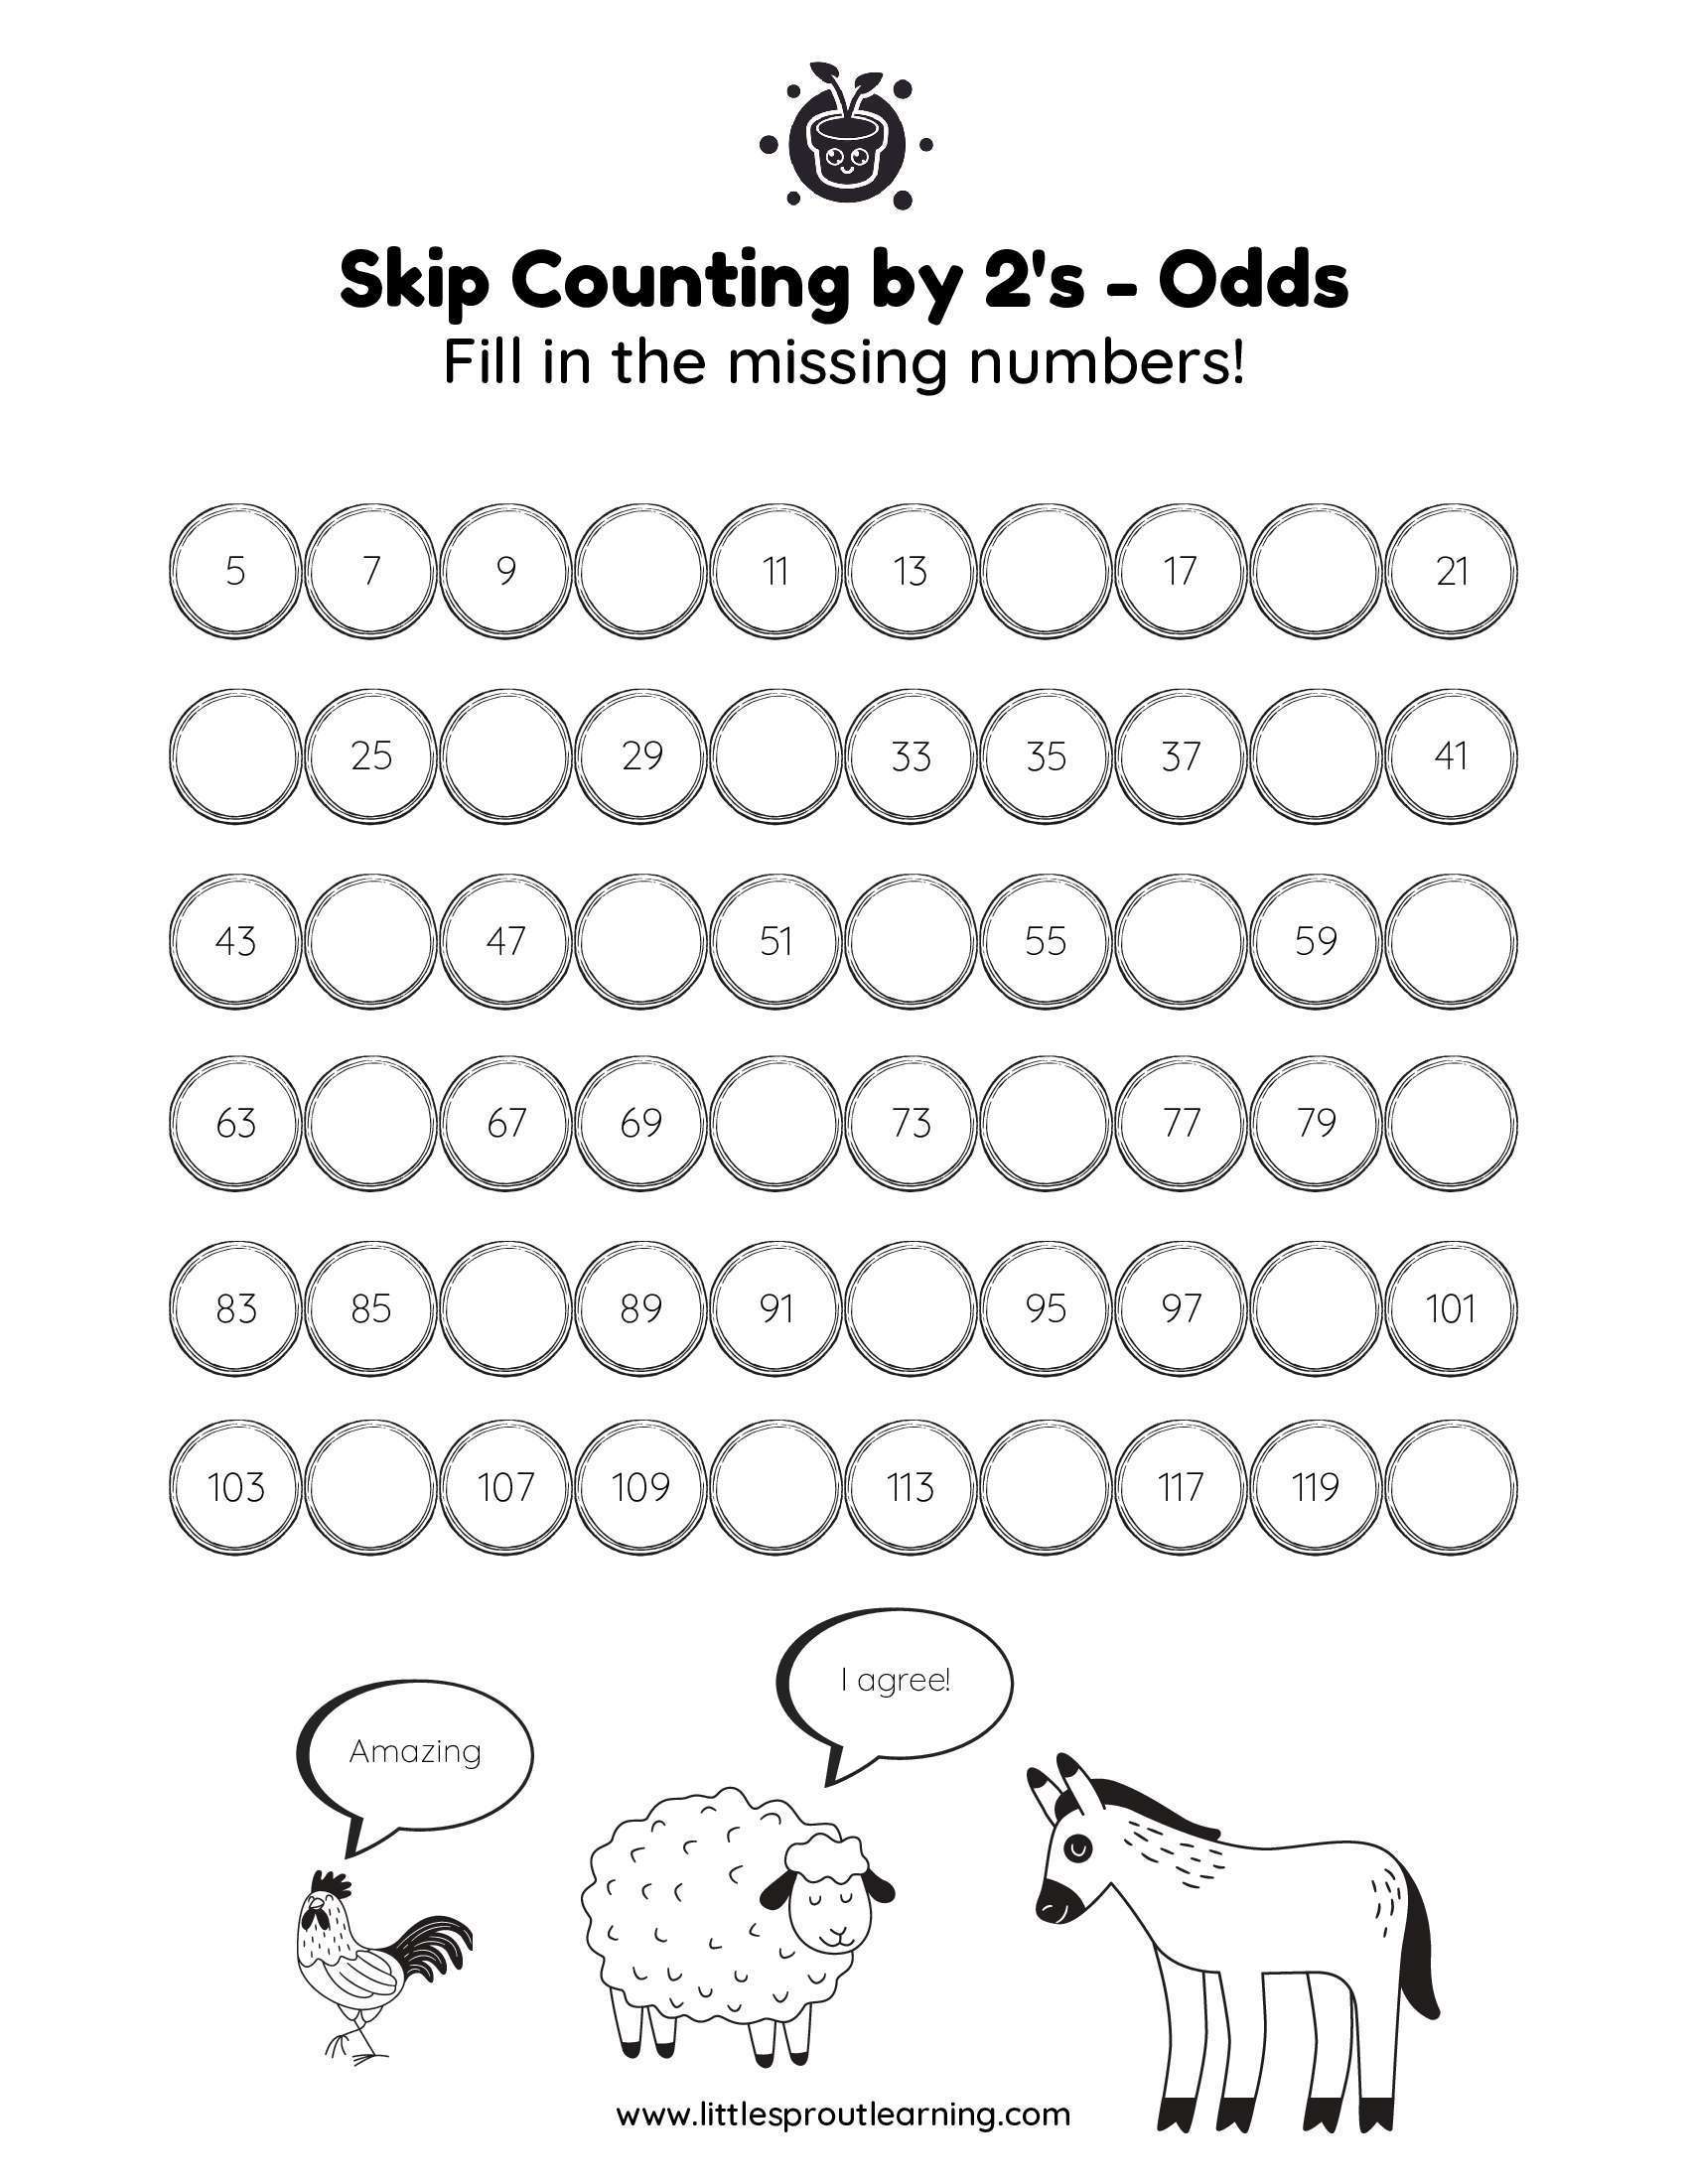 Skip Counting by 2’s